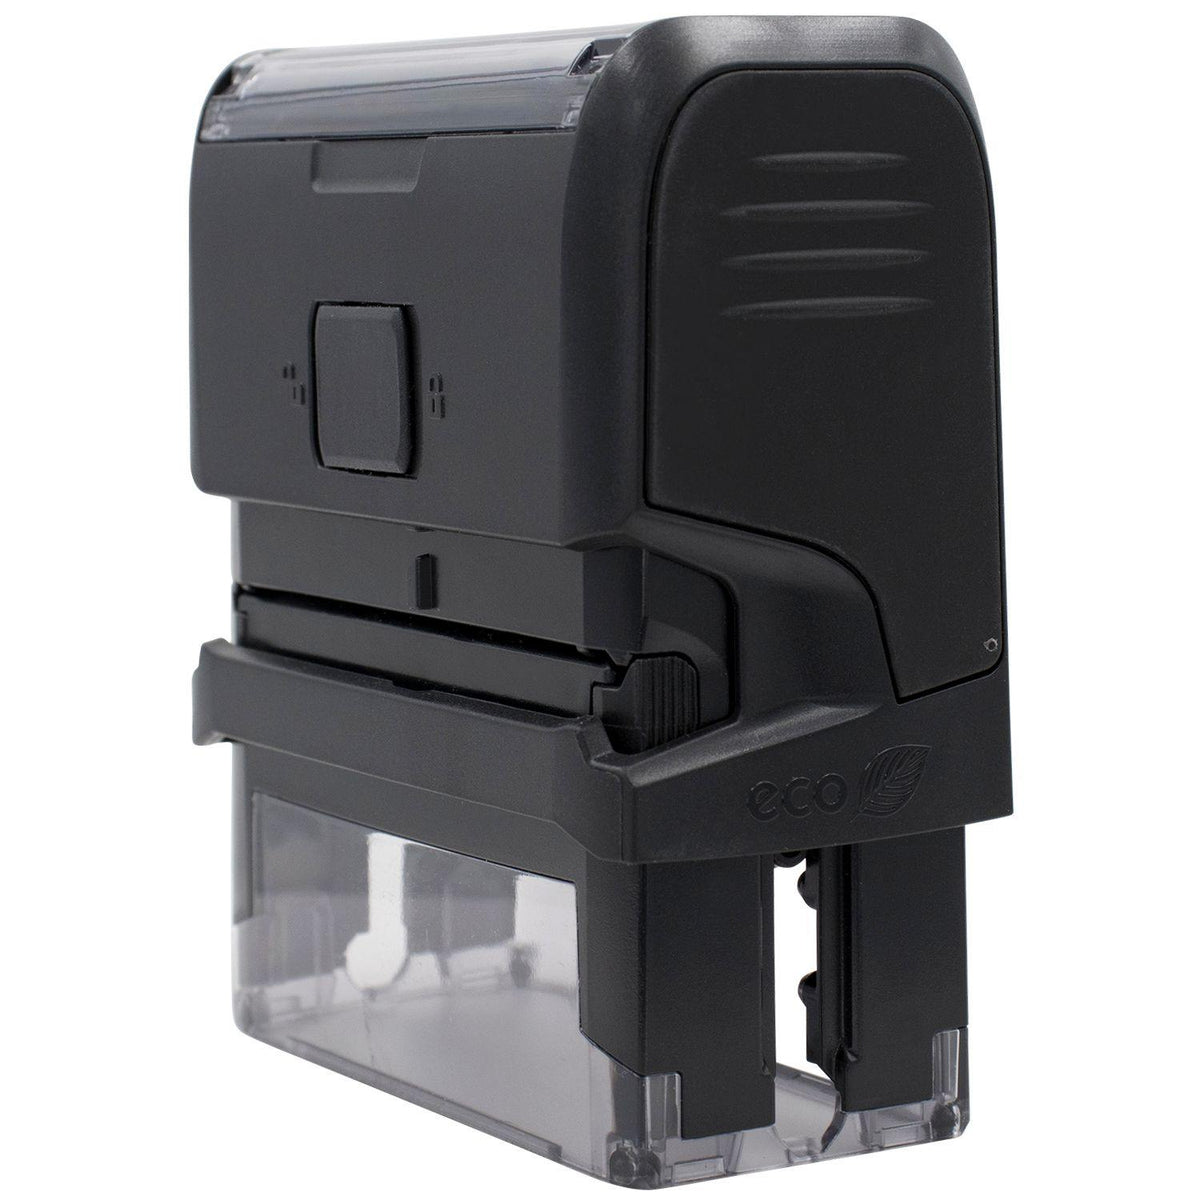 Large Self Inking Void Stamp - Engineer Seal Stamps - Brand_Trodat, Impression Size_Large, Stamp Type_Self-Inking Stamp, Type of Use_Office